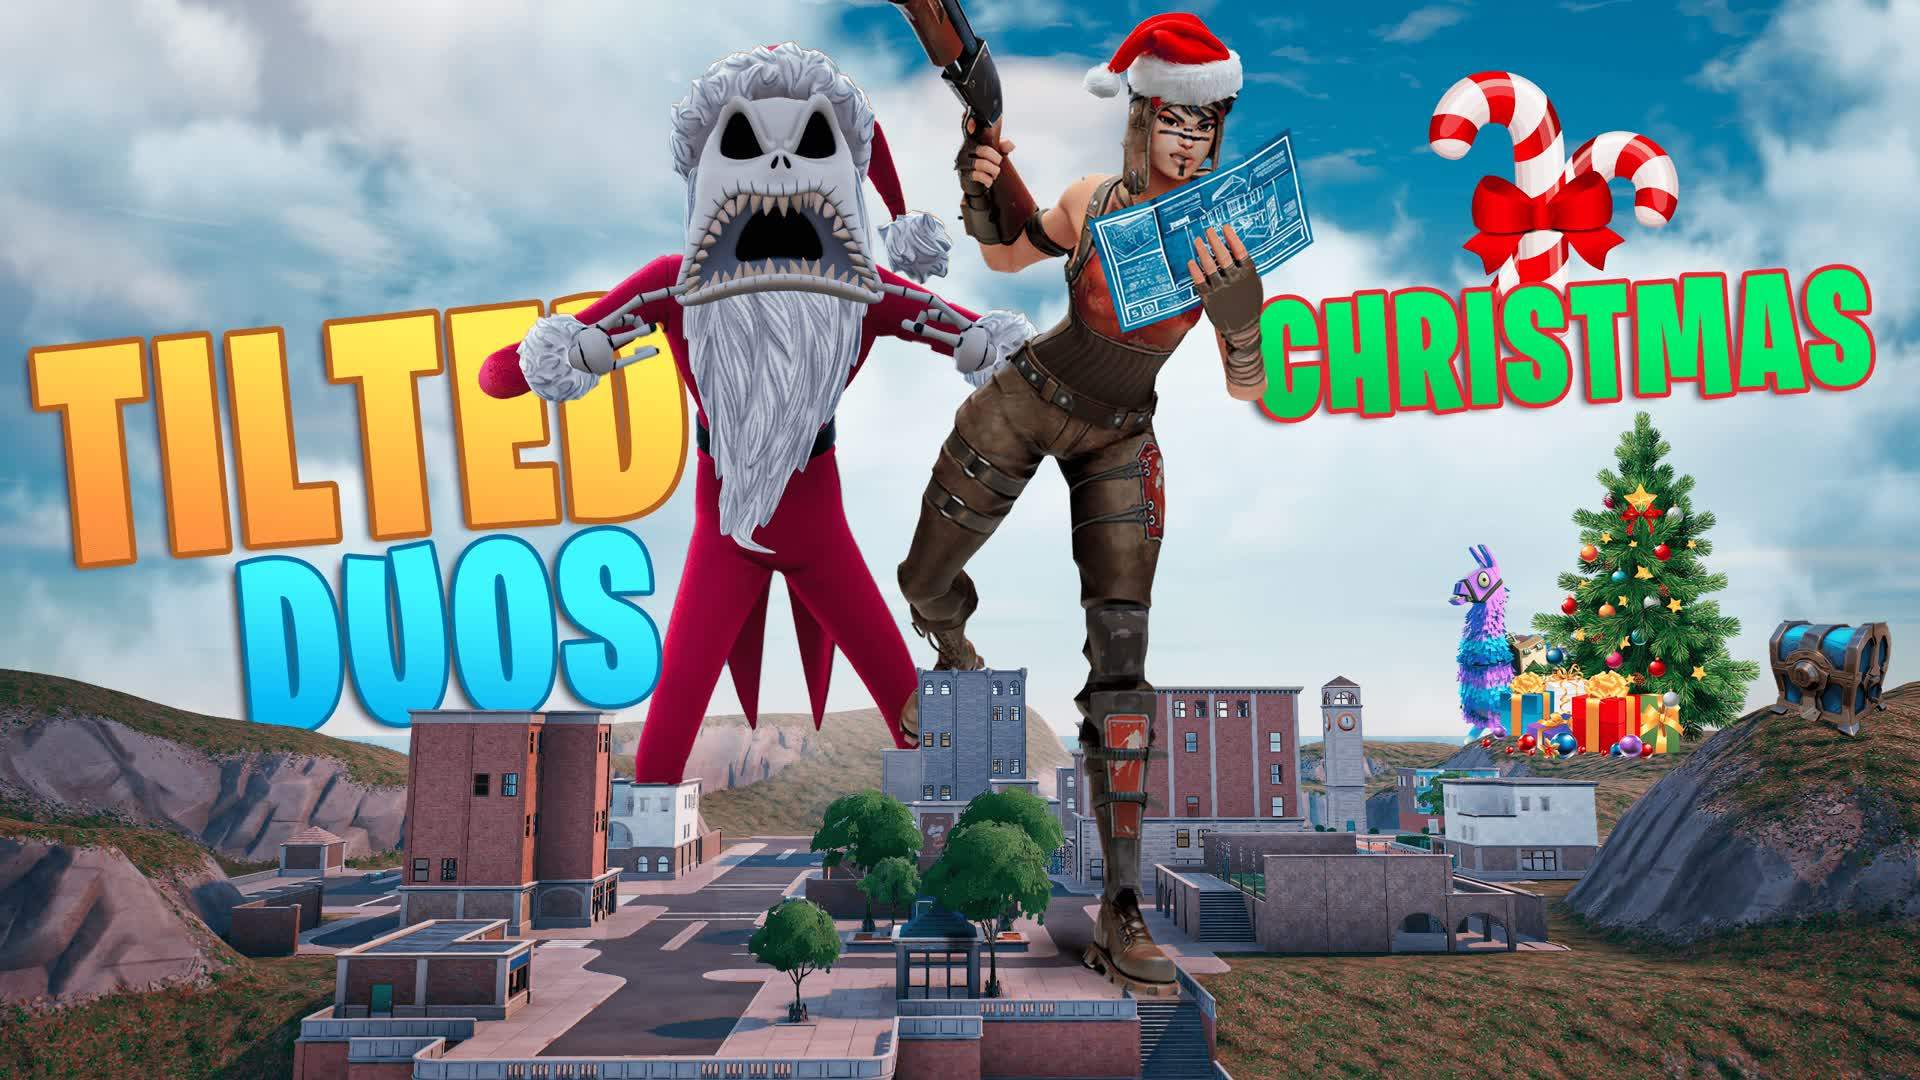 🎄⭐TILTED DUOS - CHRISTMAS⭐🎄